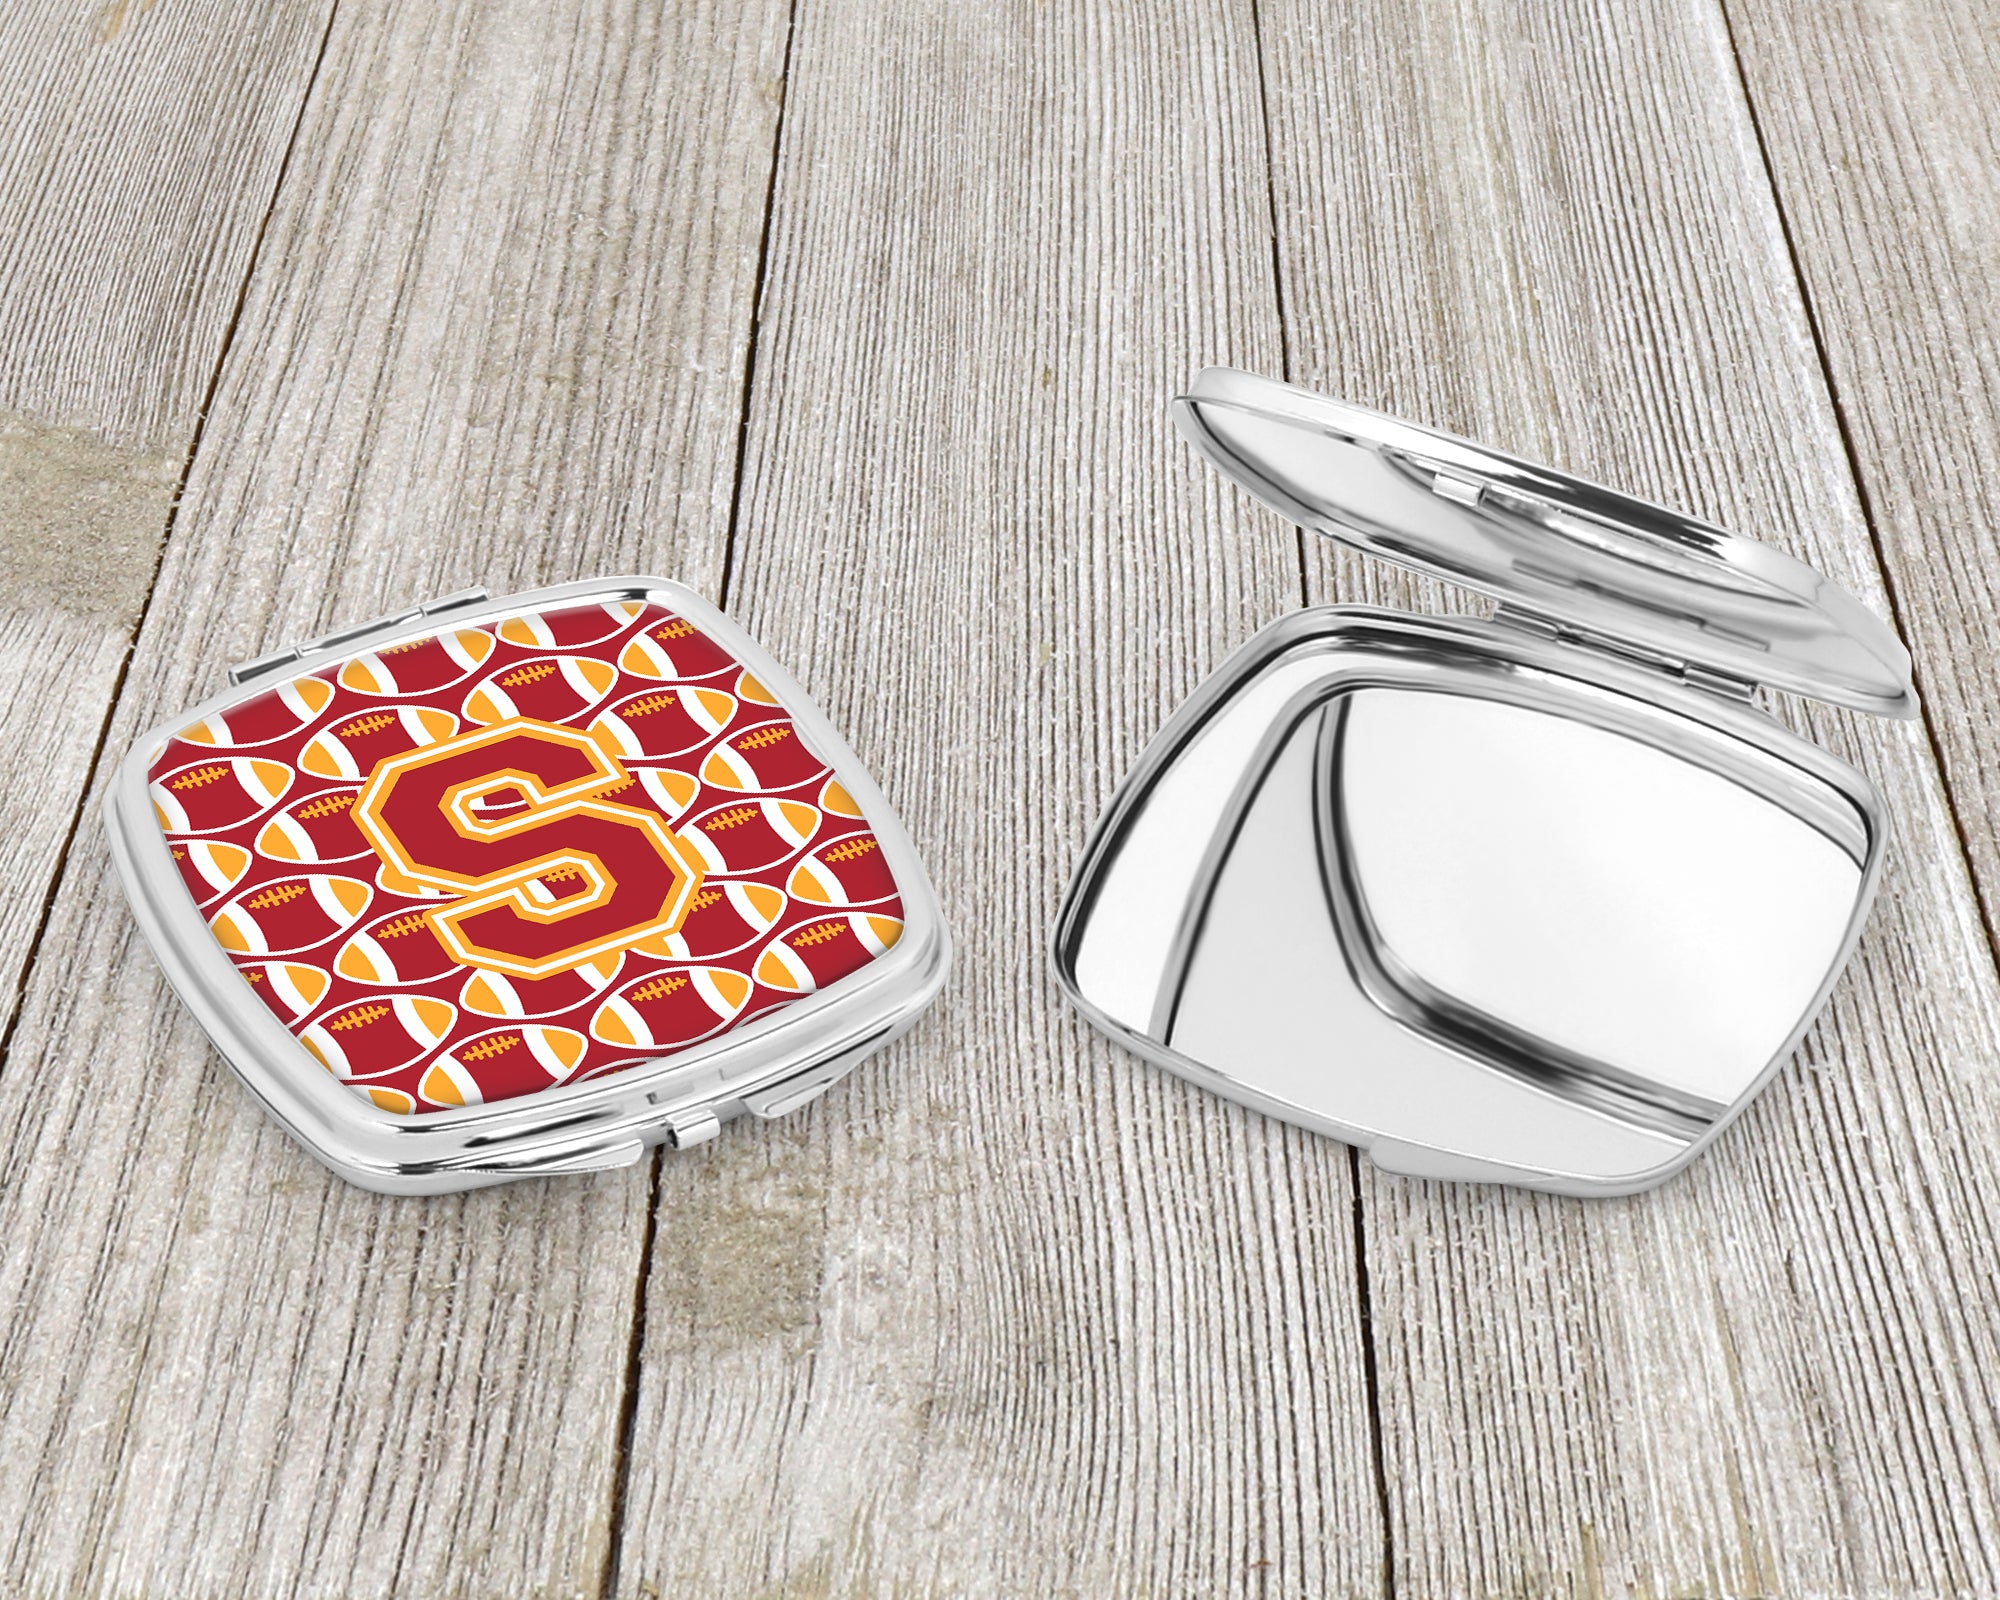 Letter S Football Cardinal and Gold Compact Mirror CJ1070-SSCM  the-store.com.